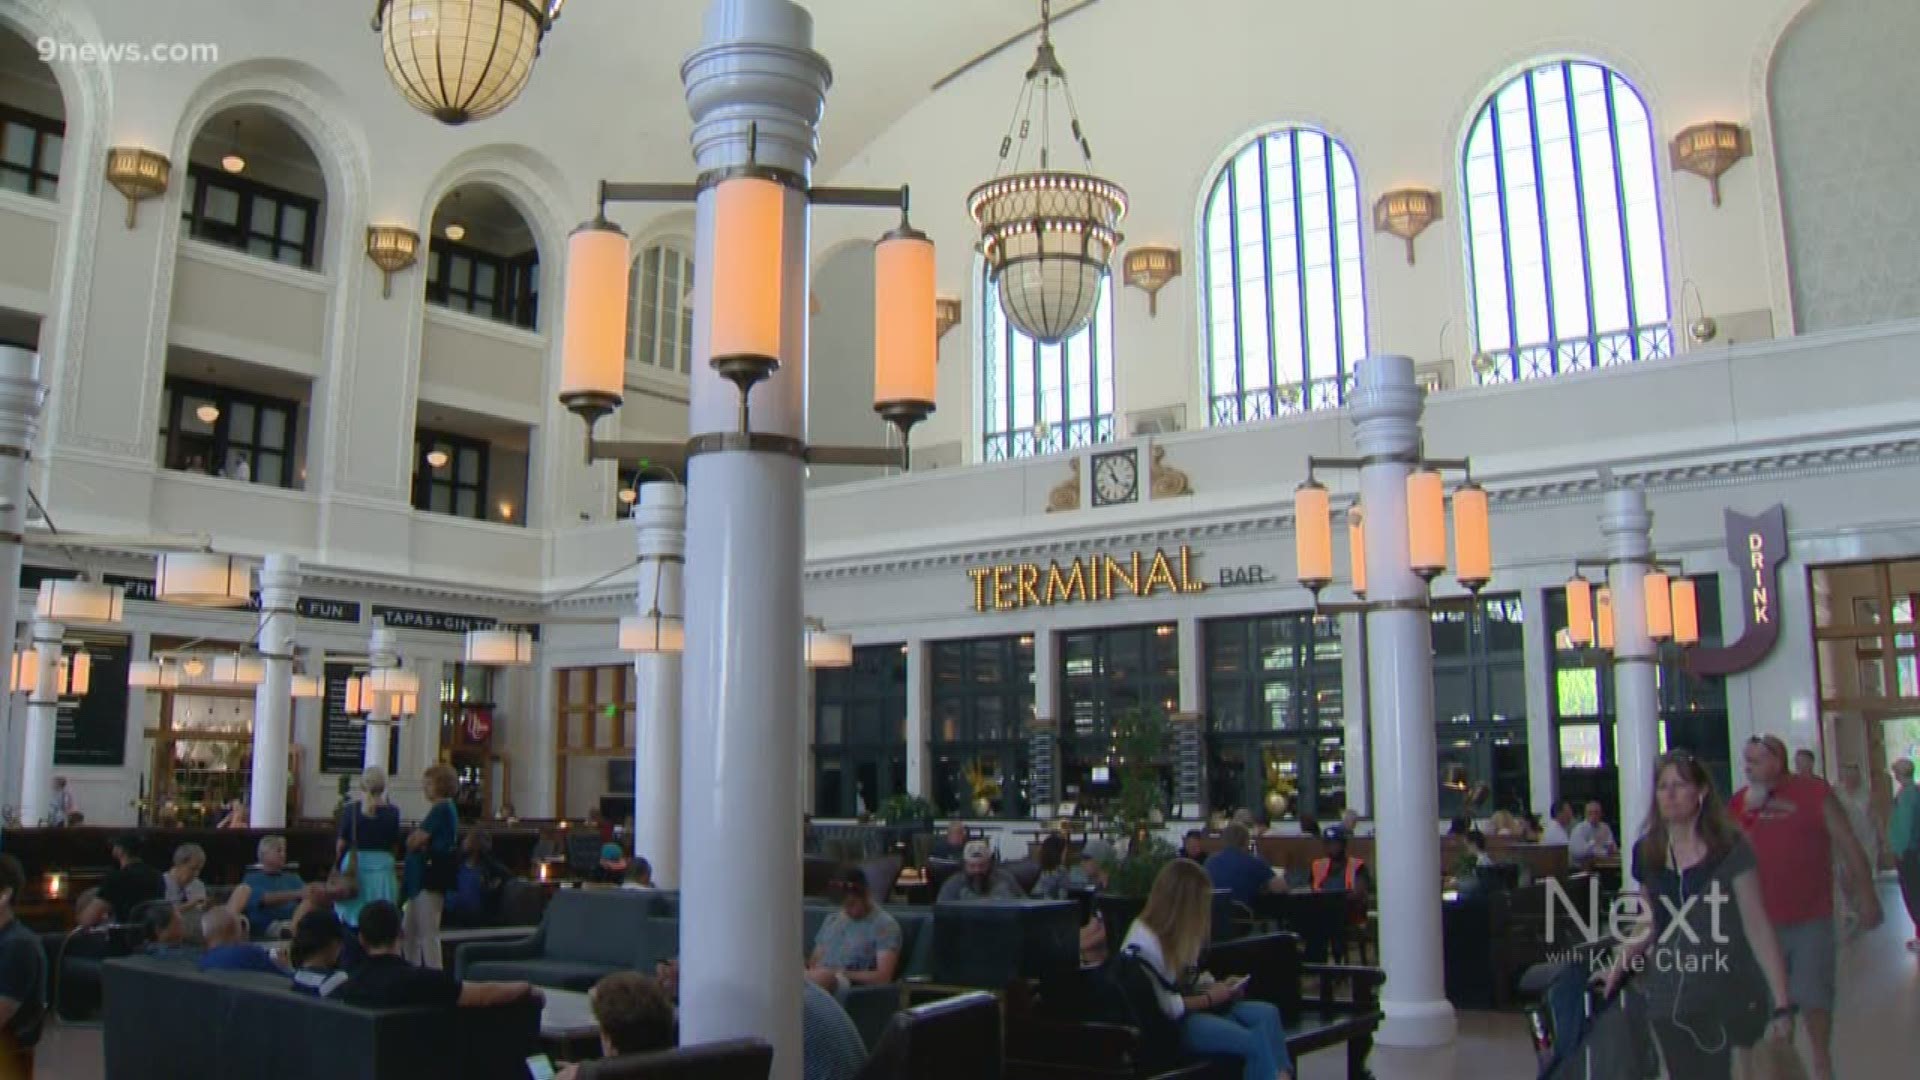 Denver's Union Station originally opened in the 1880's. It's $54 million renovation was completed 5 years ago today.